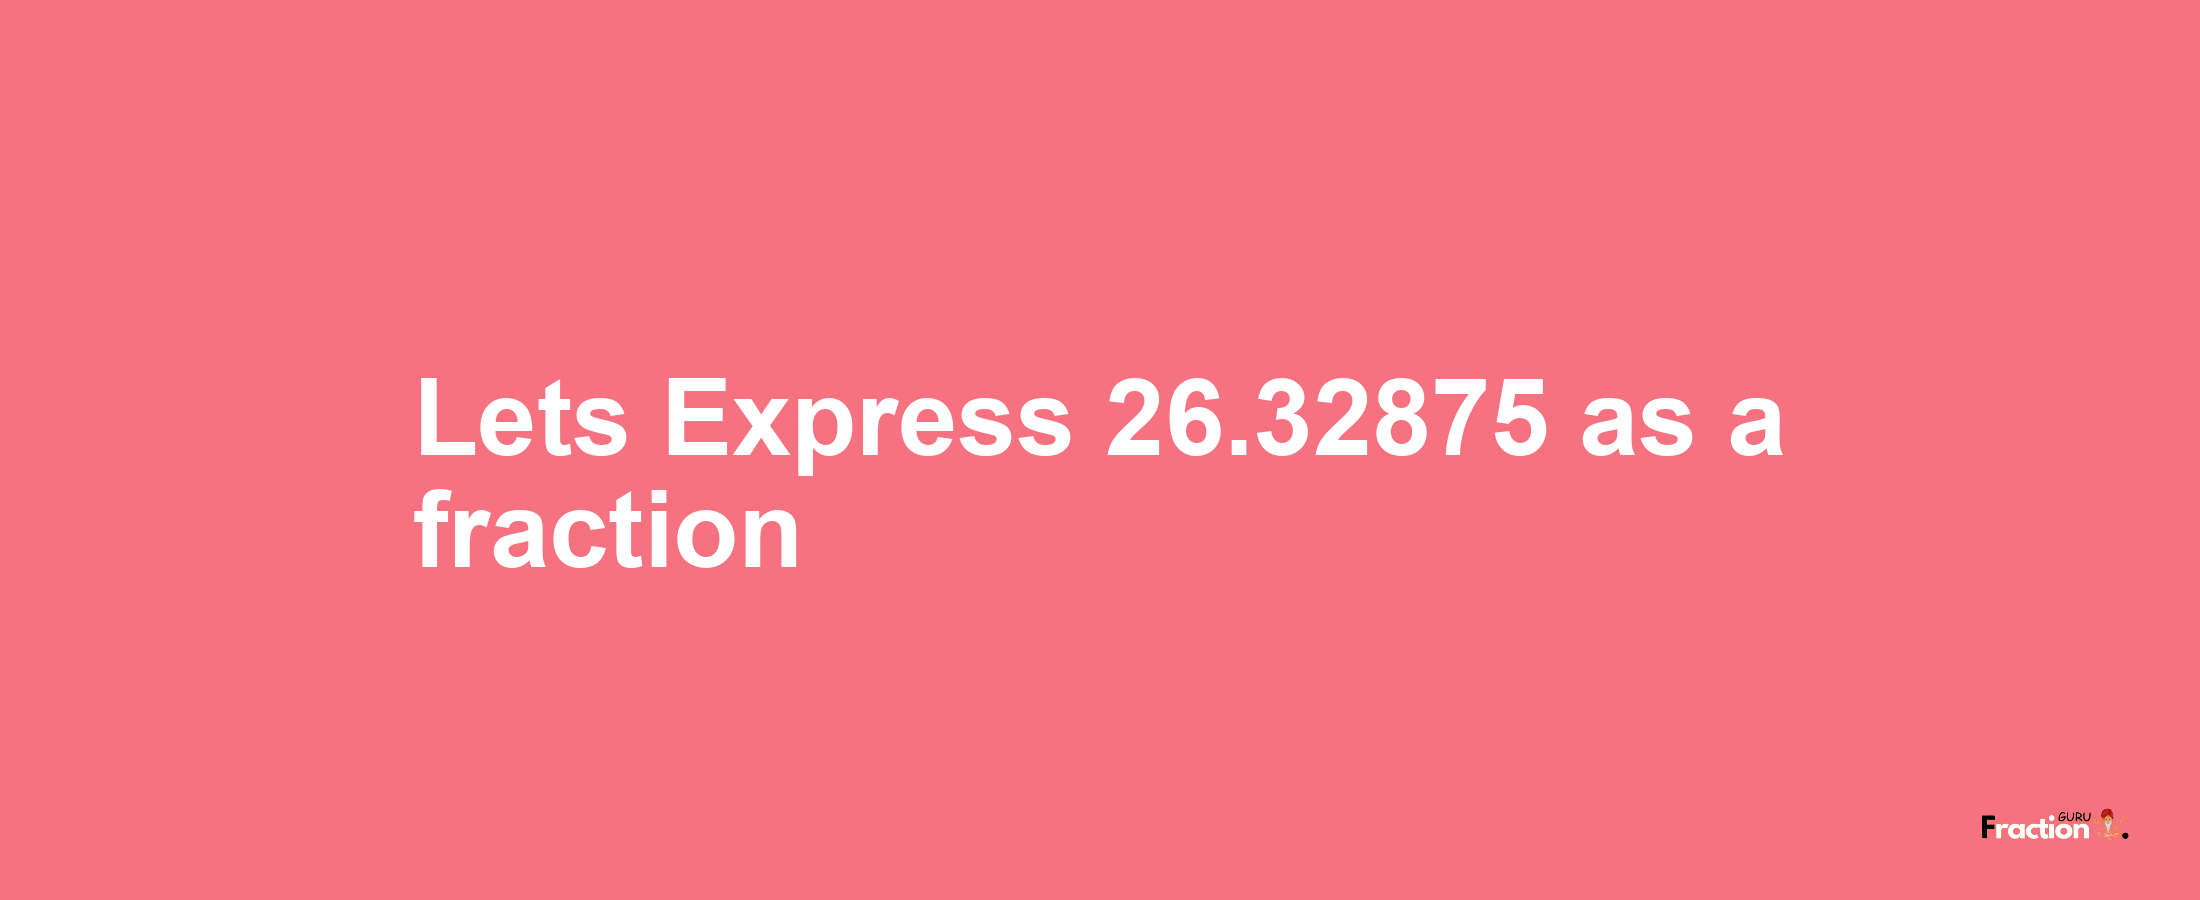 Lets Express 26.32875 as afraction